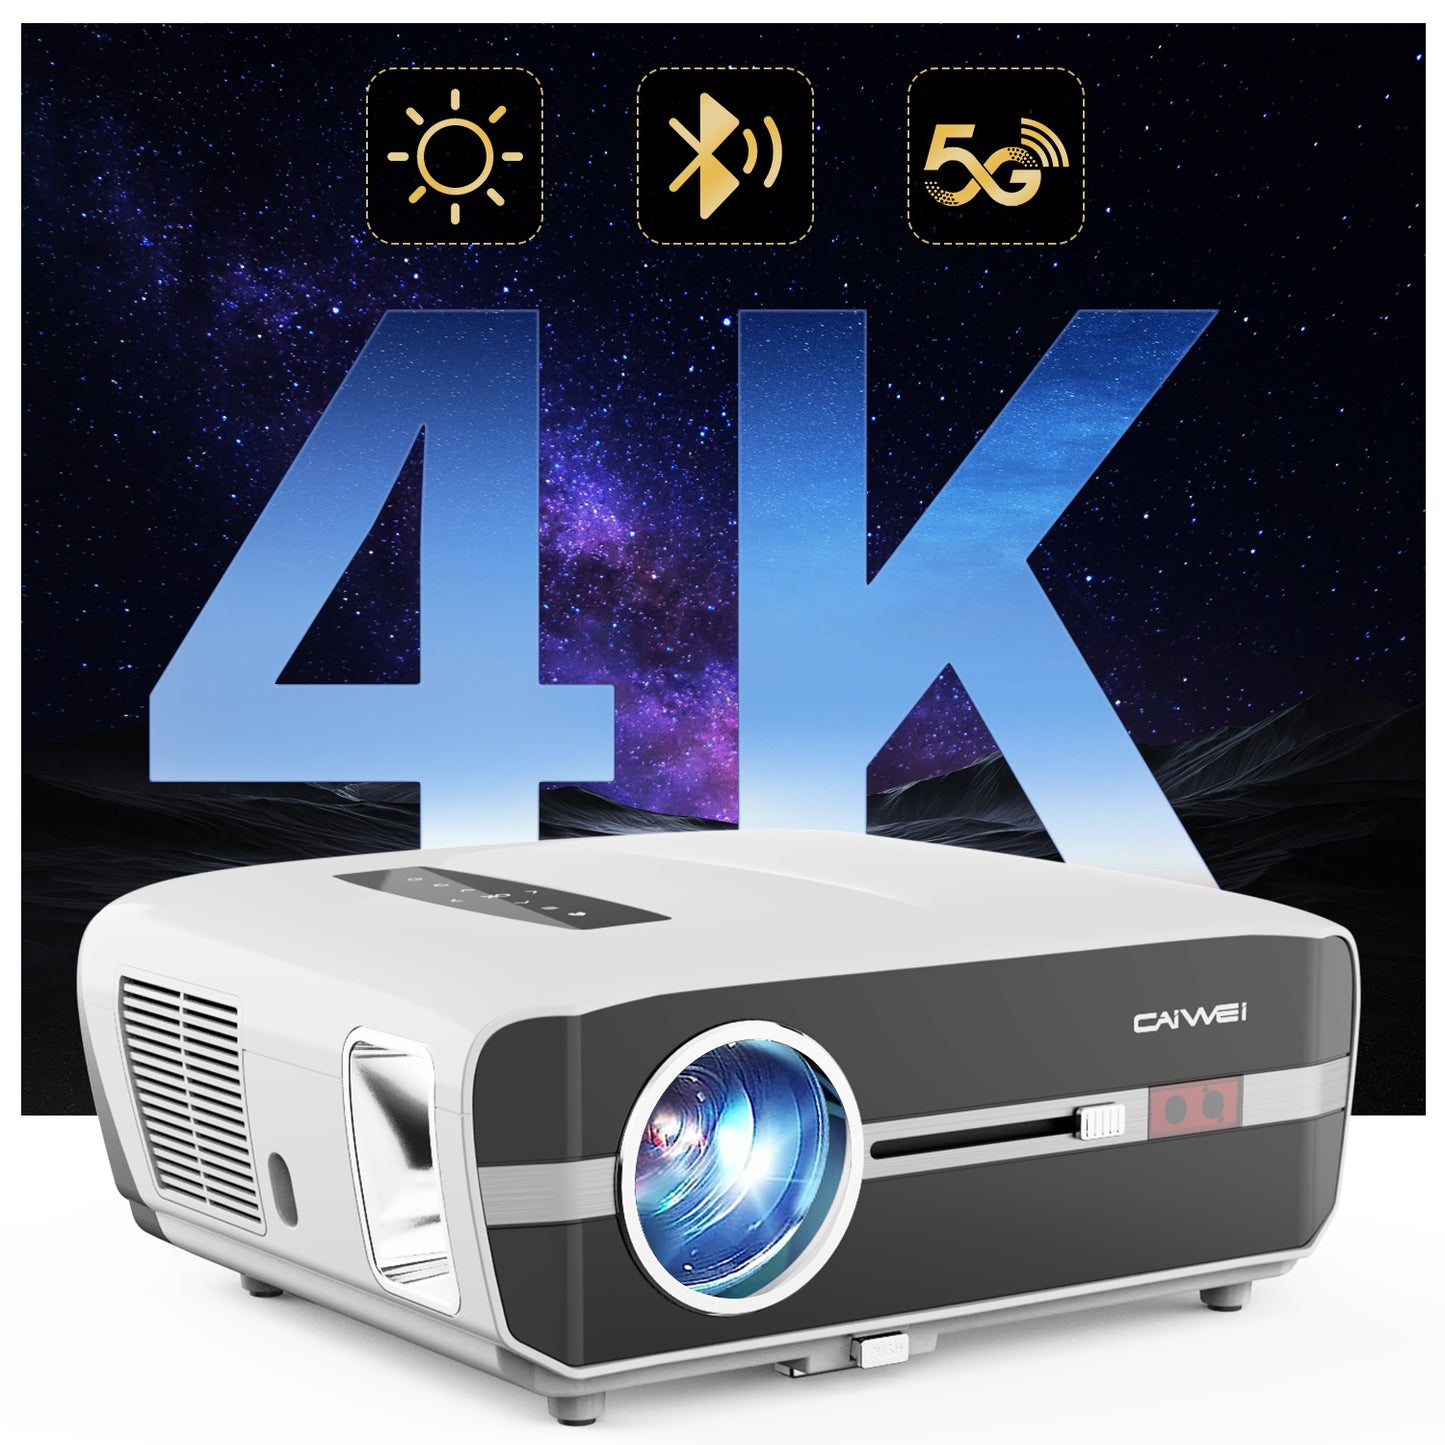 A9S 4K Movie Projector Daylight Viewing 1000ANSI/13000lm Smart App Streaming Bluetooth WiFi Outdoor Projector with Android TV